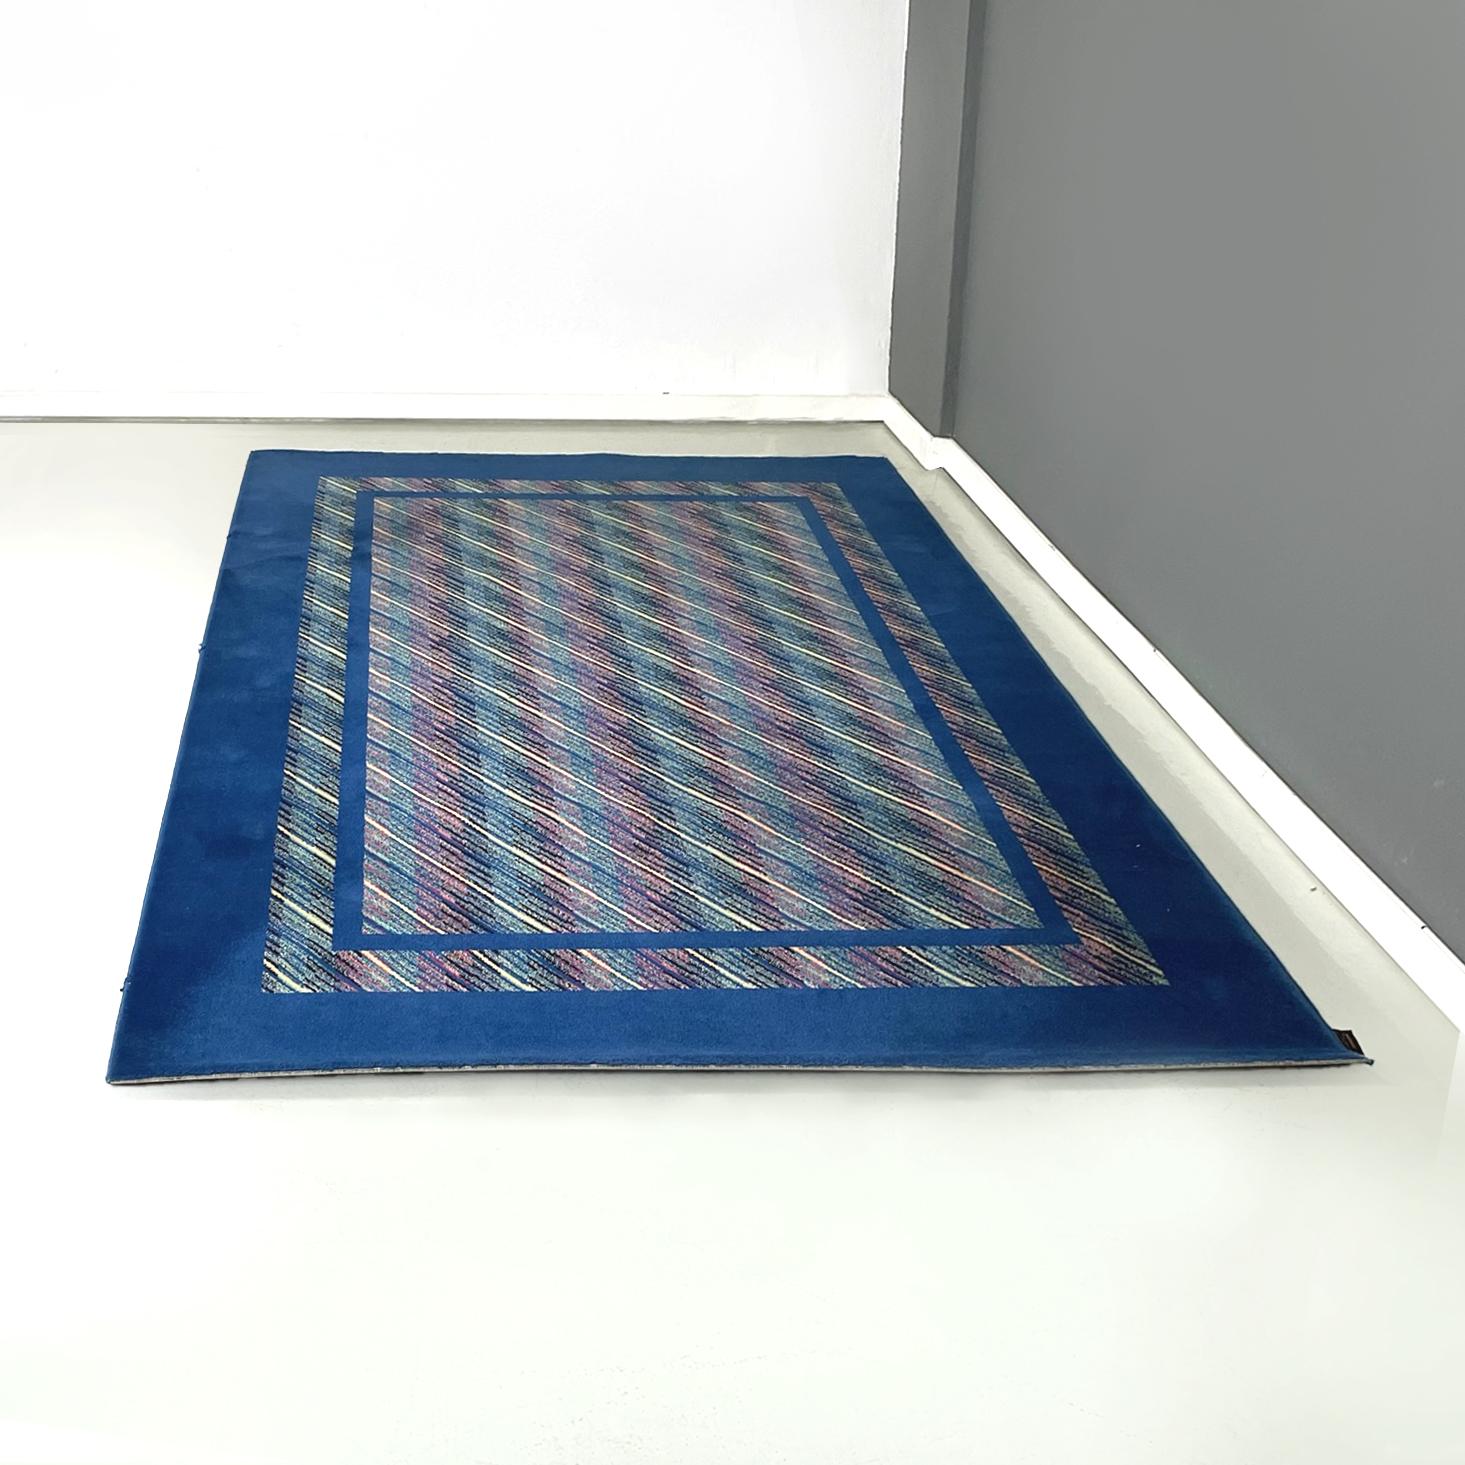 Italian modern blue wool rectangular carpet by Missoni, 1990s
Rectangular carpet in pure virgin wool fabric. The profiles of the rug are in bright blue, the interiors are thin stripes of different colors: yellow, pink, black and green.
Produced by